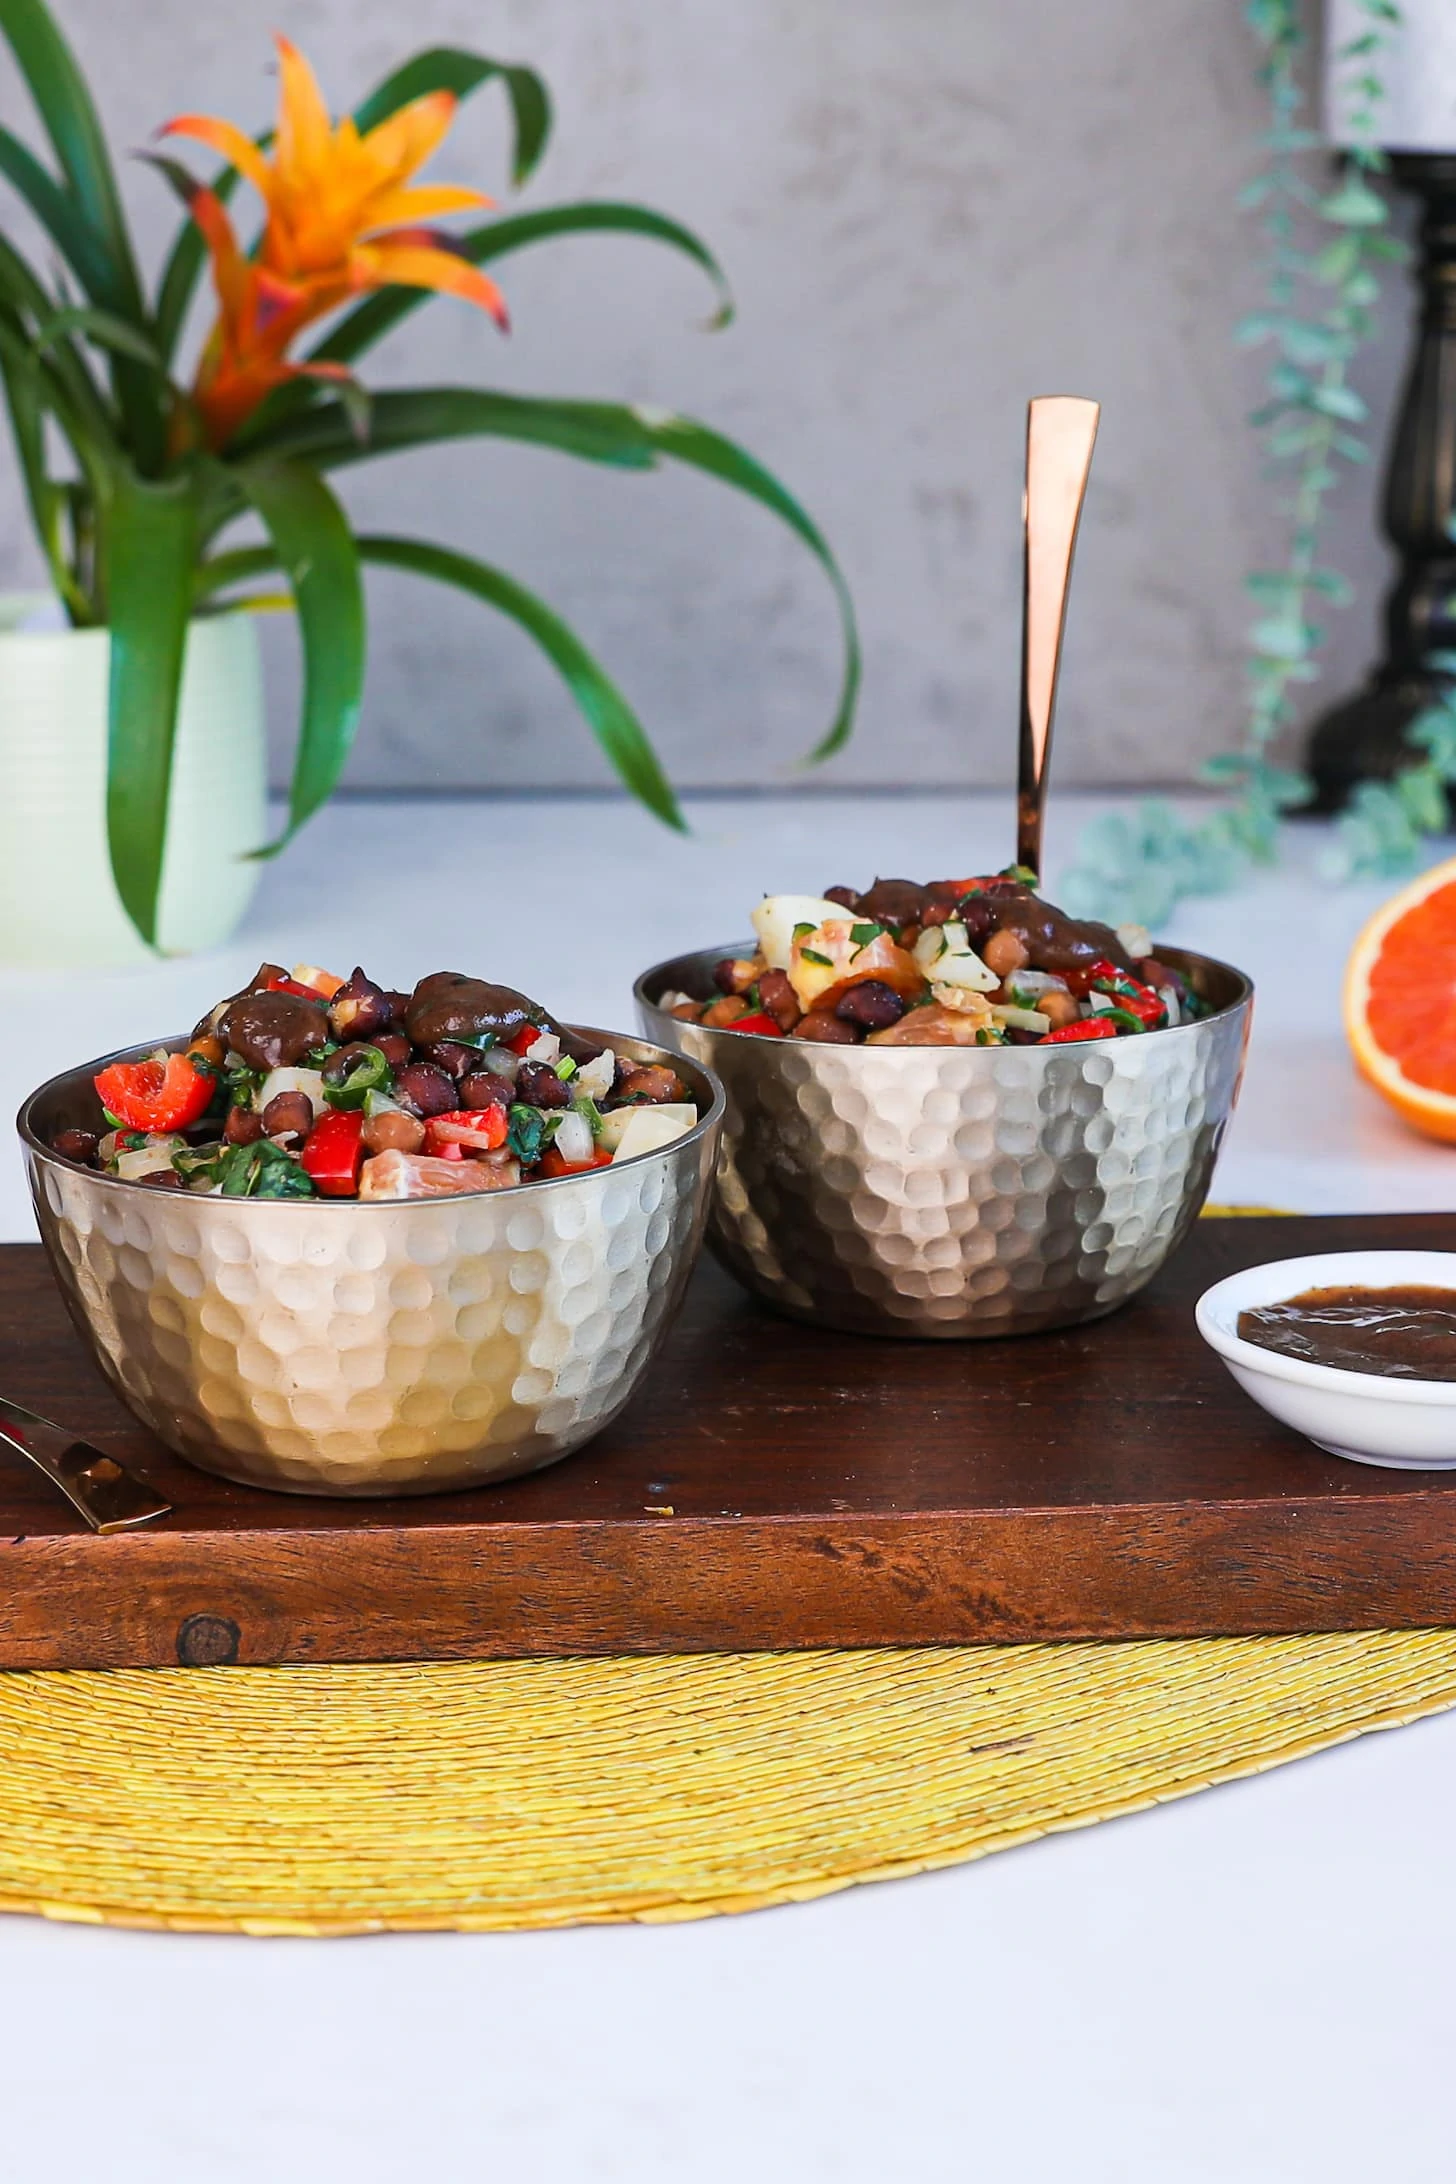 Two bowls of salad with chopped peppers, orange cubes, onion and herbs topped with a brown sauce placed on a wooden board.